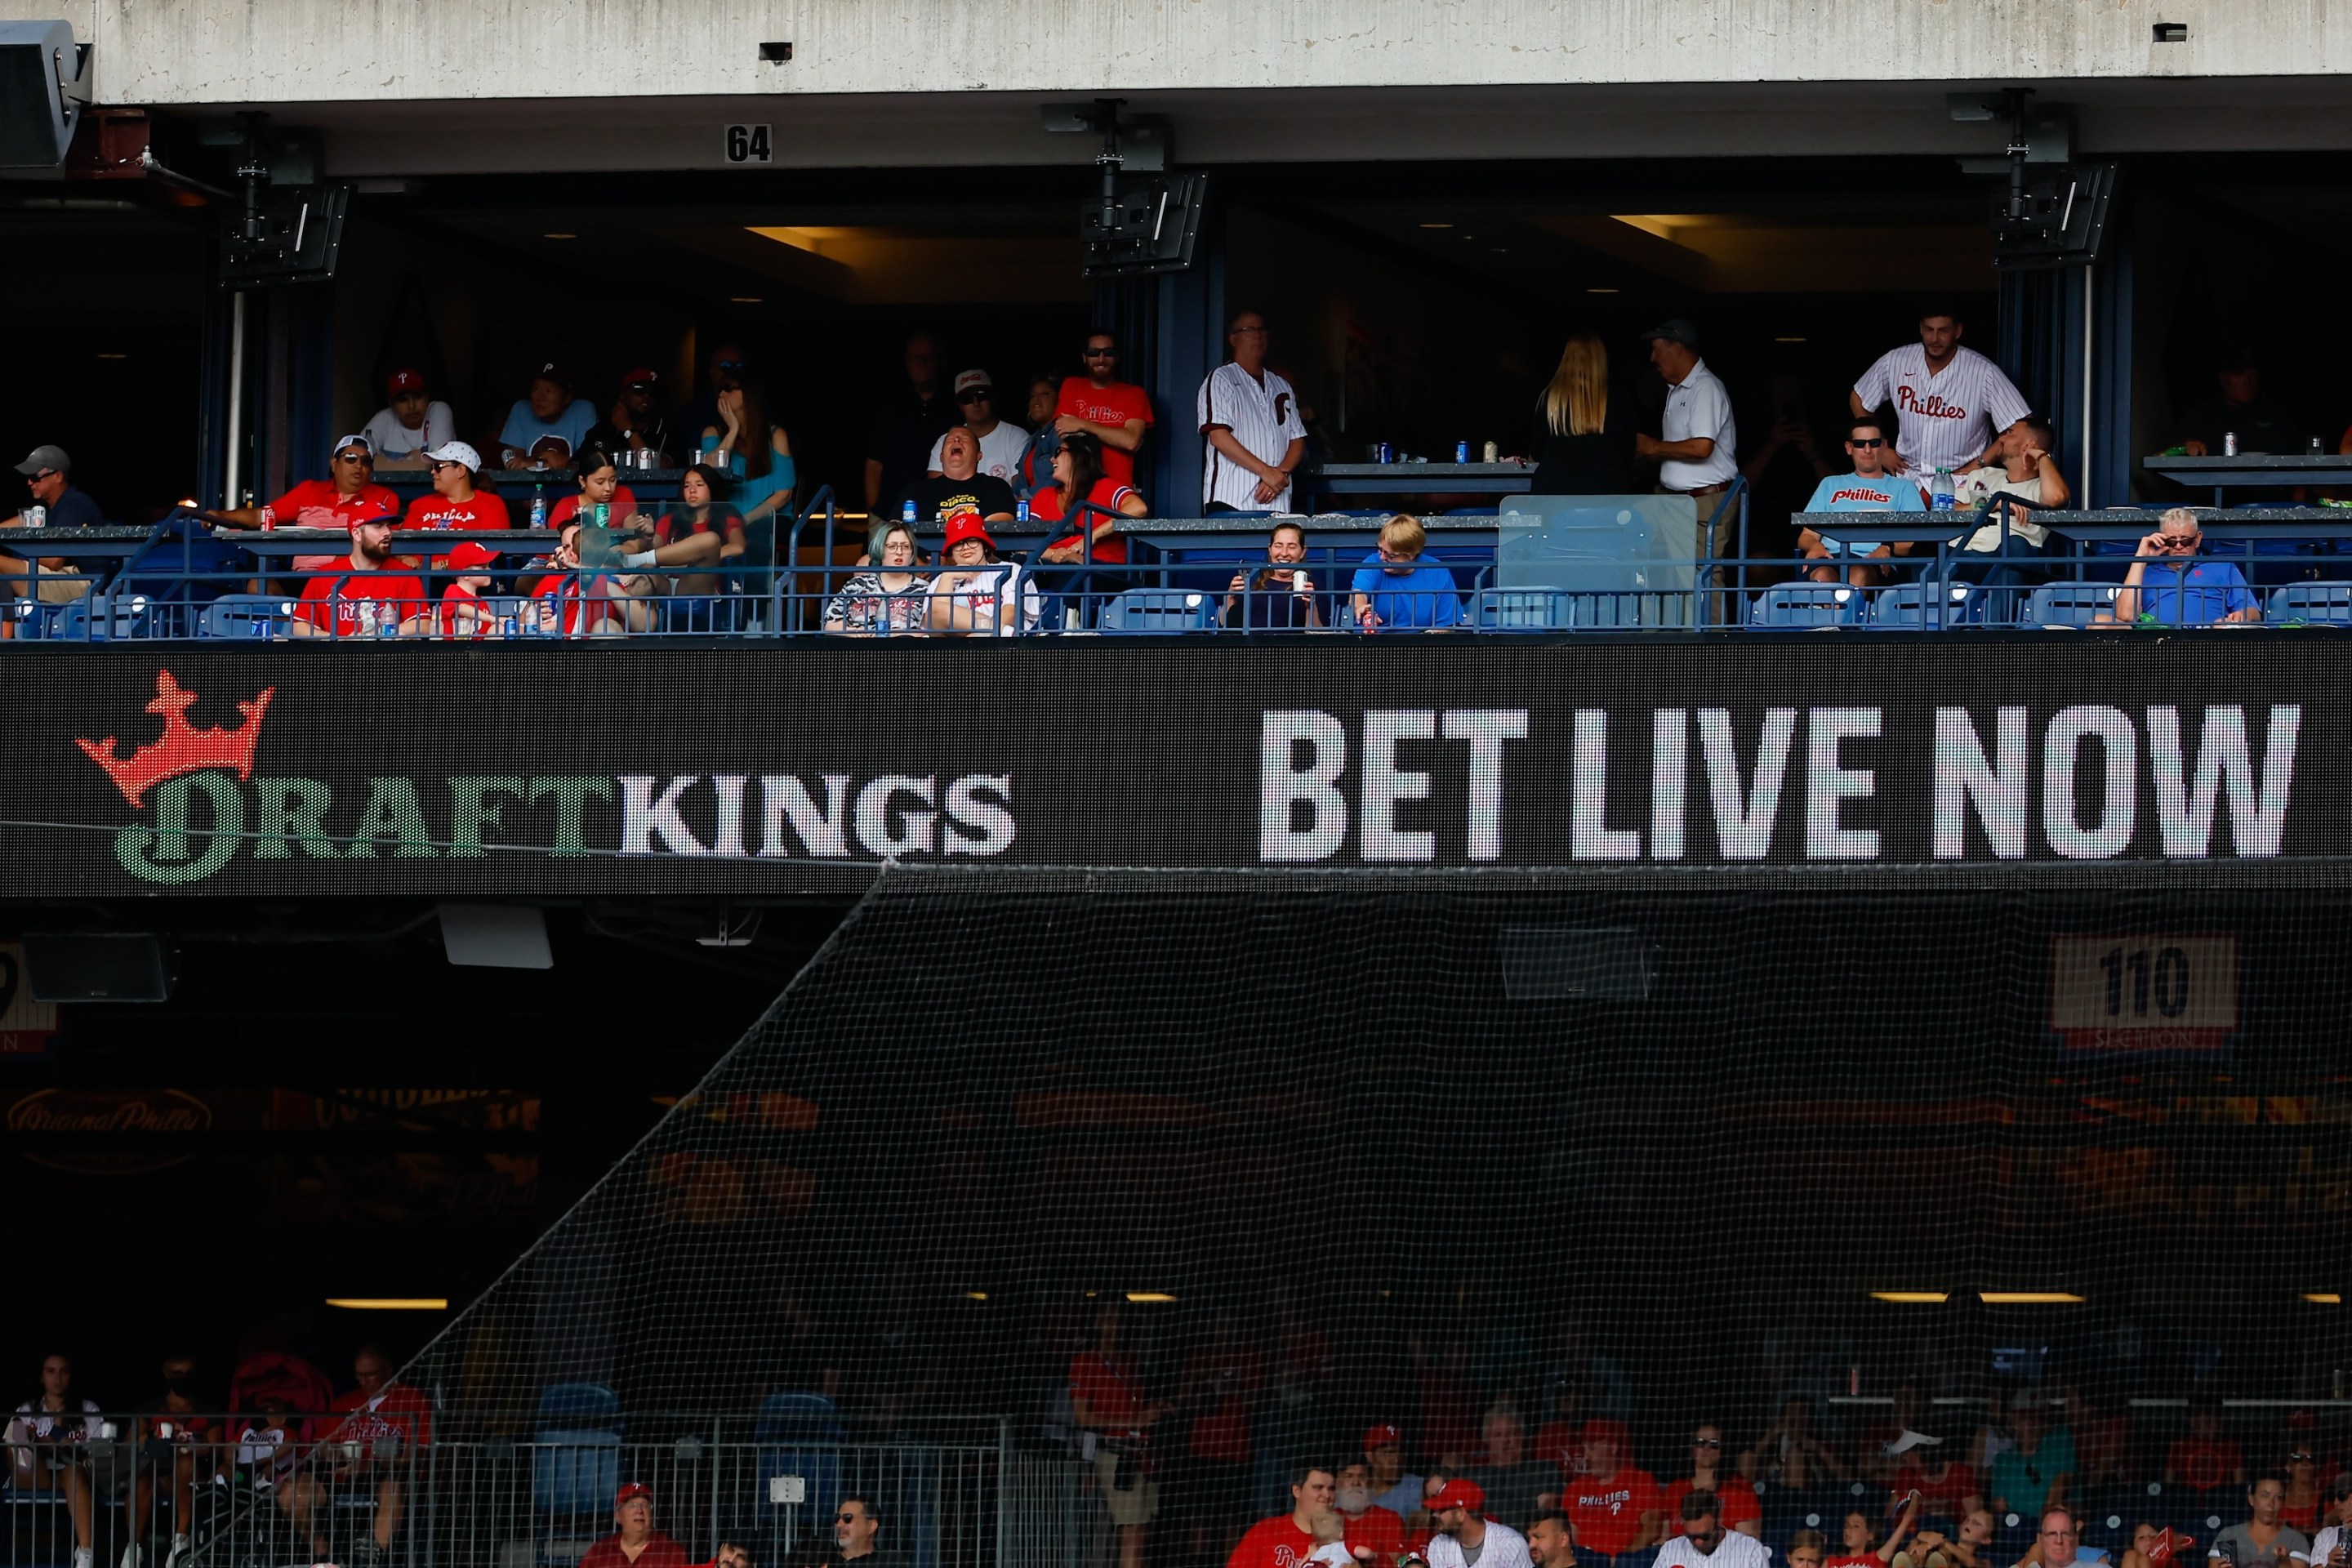 A general view of the DraftKings Bet Live Now signage during the Major League Baseball game between the Philadelphia Phillies and the Washington Nationals on July 7, 2022.